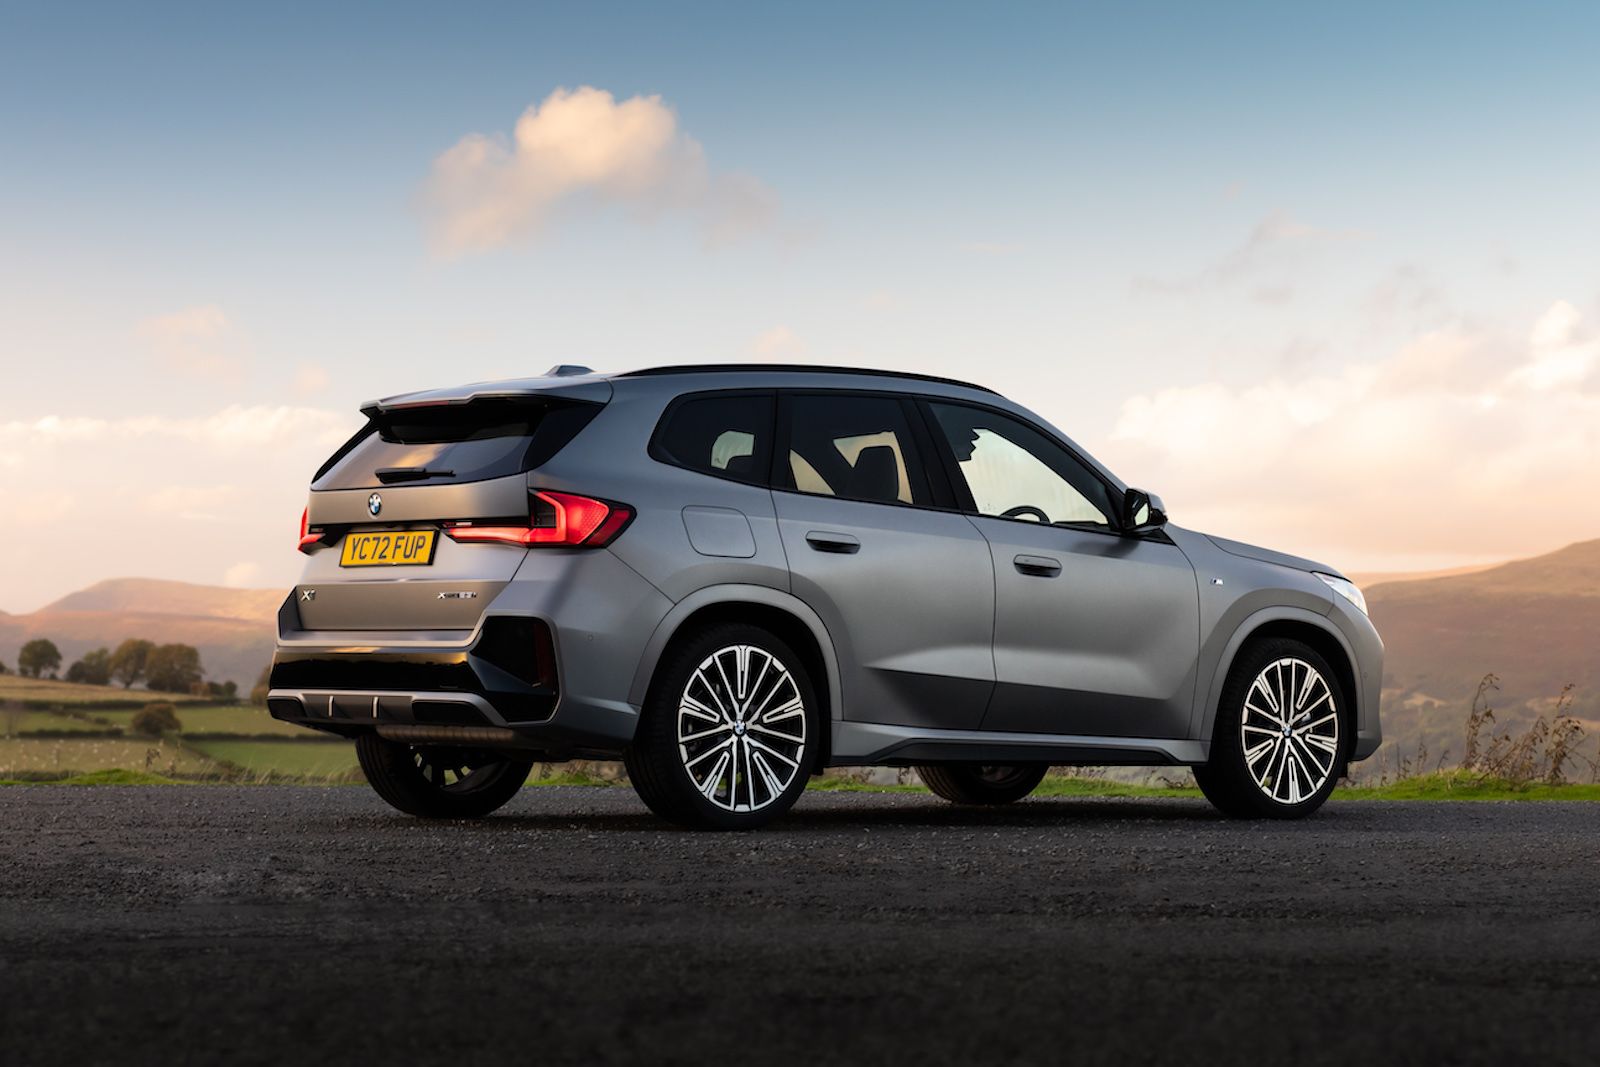 BMW X1 review: really quite average – the electric version even more so